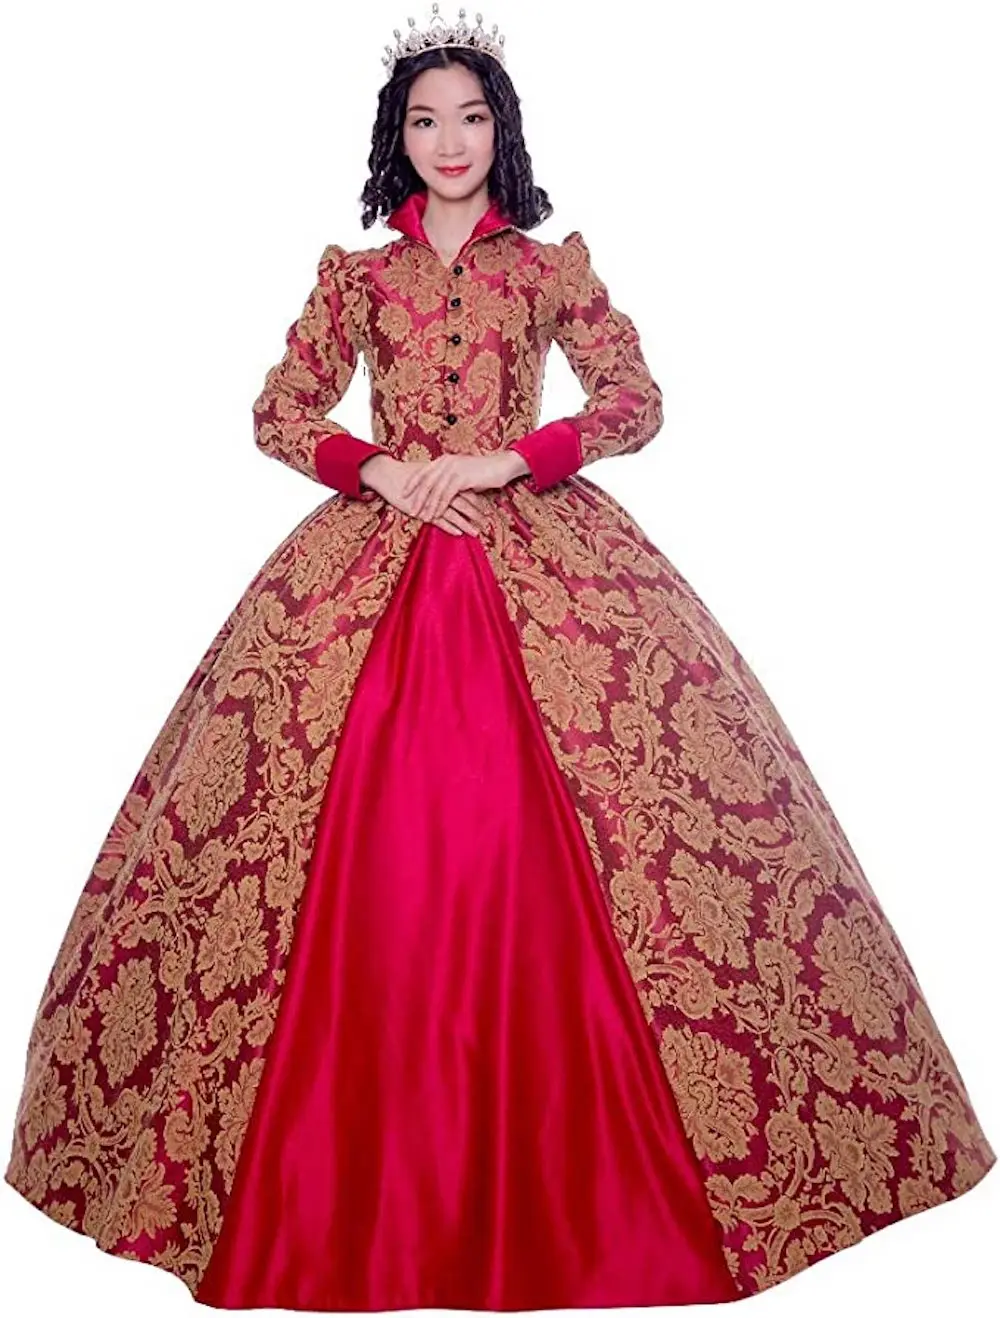 KEMAO High-end Court Rococo Baroque  Marie  Antoinette Ball Gown 18th Century Renaissance Historical  Period  Evening Dresses